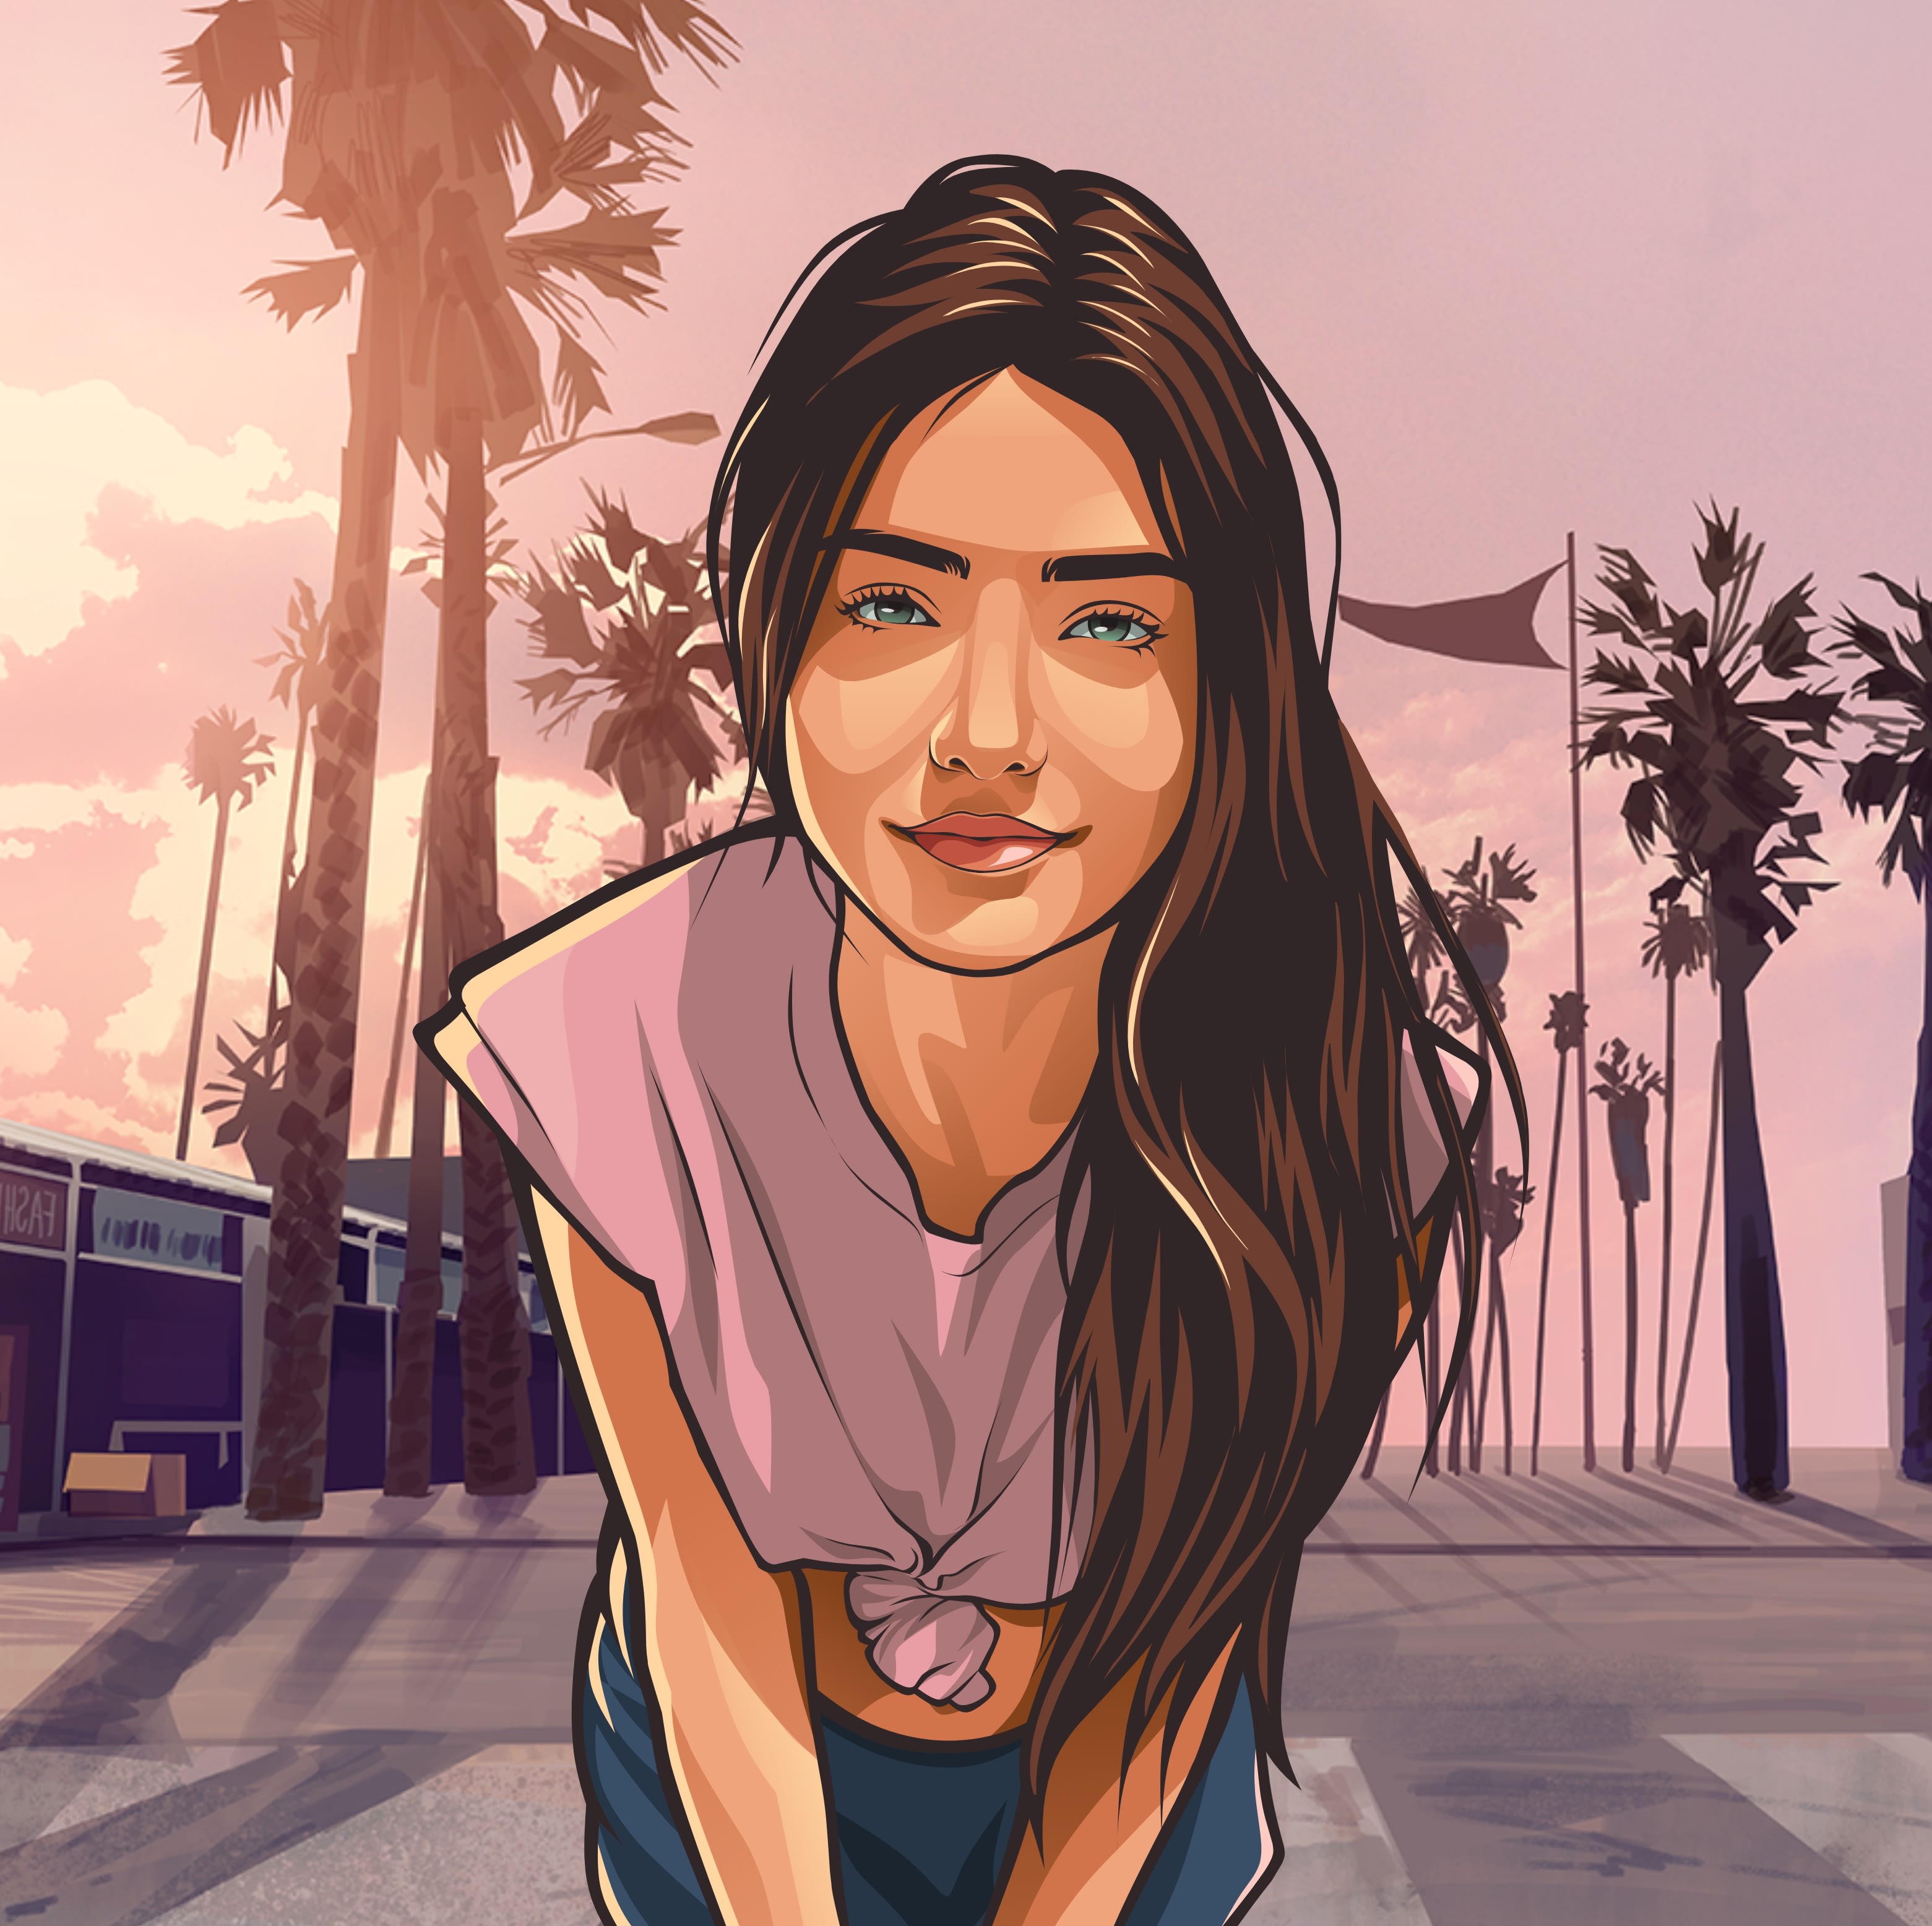 Make your photo into stunning gta cartoon art by Luckproject | Fiverr